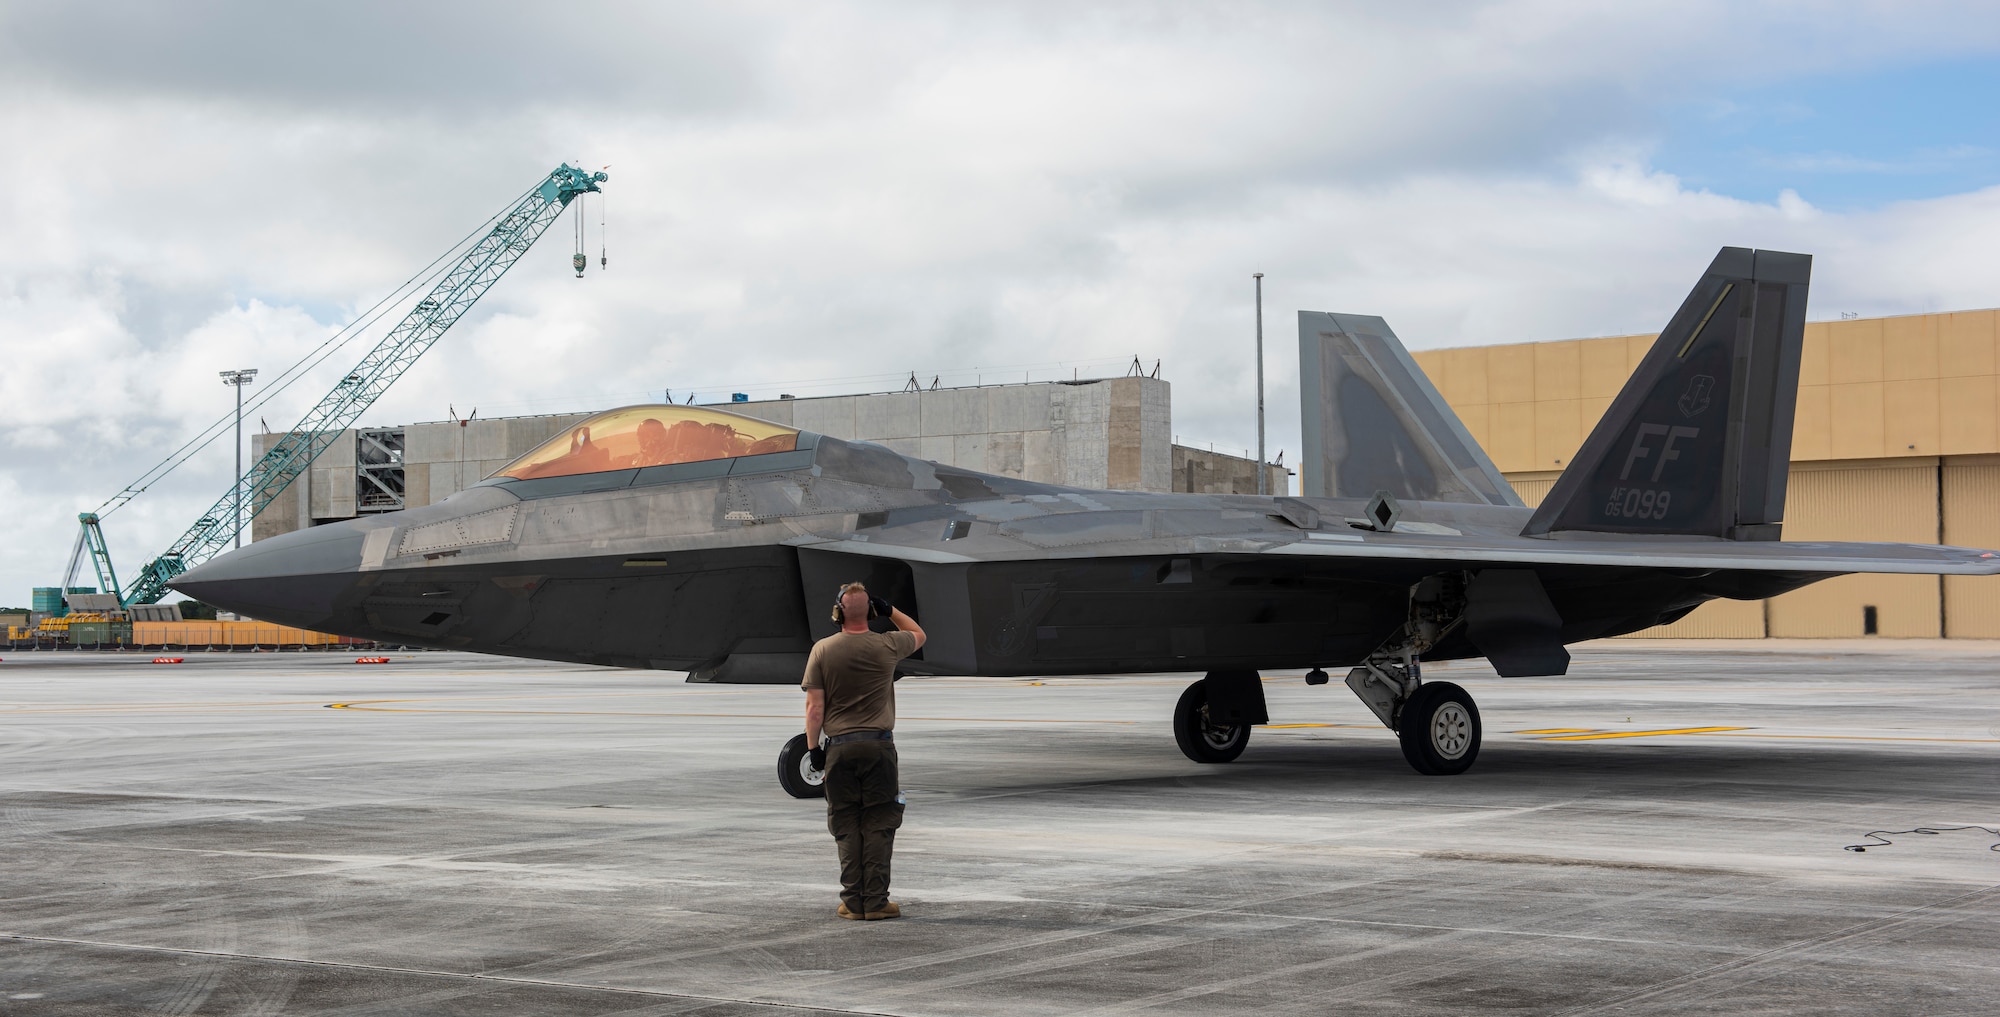 U.S. Air Force Staff Sgt. Jacob Bonter, a dedicated crew chief assigned to the 94th Fighter Squadron, salutes to an F-22 assigned to the 94th FS as it taxies off after completing a hot refuel during a Dynamic Force Employment at Andersen Air Force Base, Guam, Nov. 22, 2020. DFE is an operational platform that allows our forces to be strategically predictable and operationally unpredictable. The United States security presence, along with our allies and partners, underpins the peace and stability that has enabled the Indo-Pacific region to develop and prosper for more than seven decades. (U.S. Air Force photo by Senior Airman Michael S. Murphy)